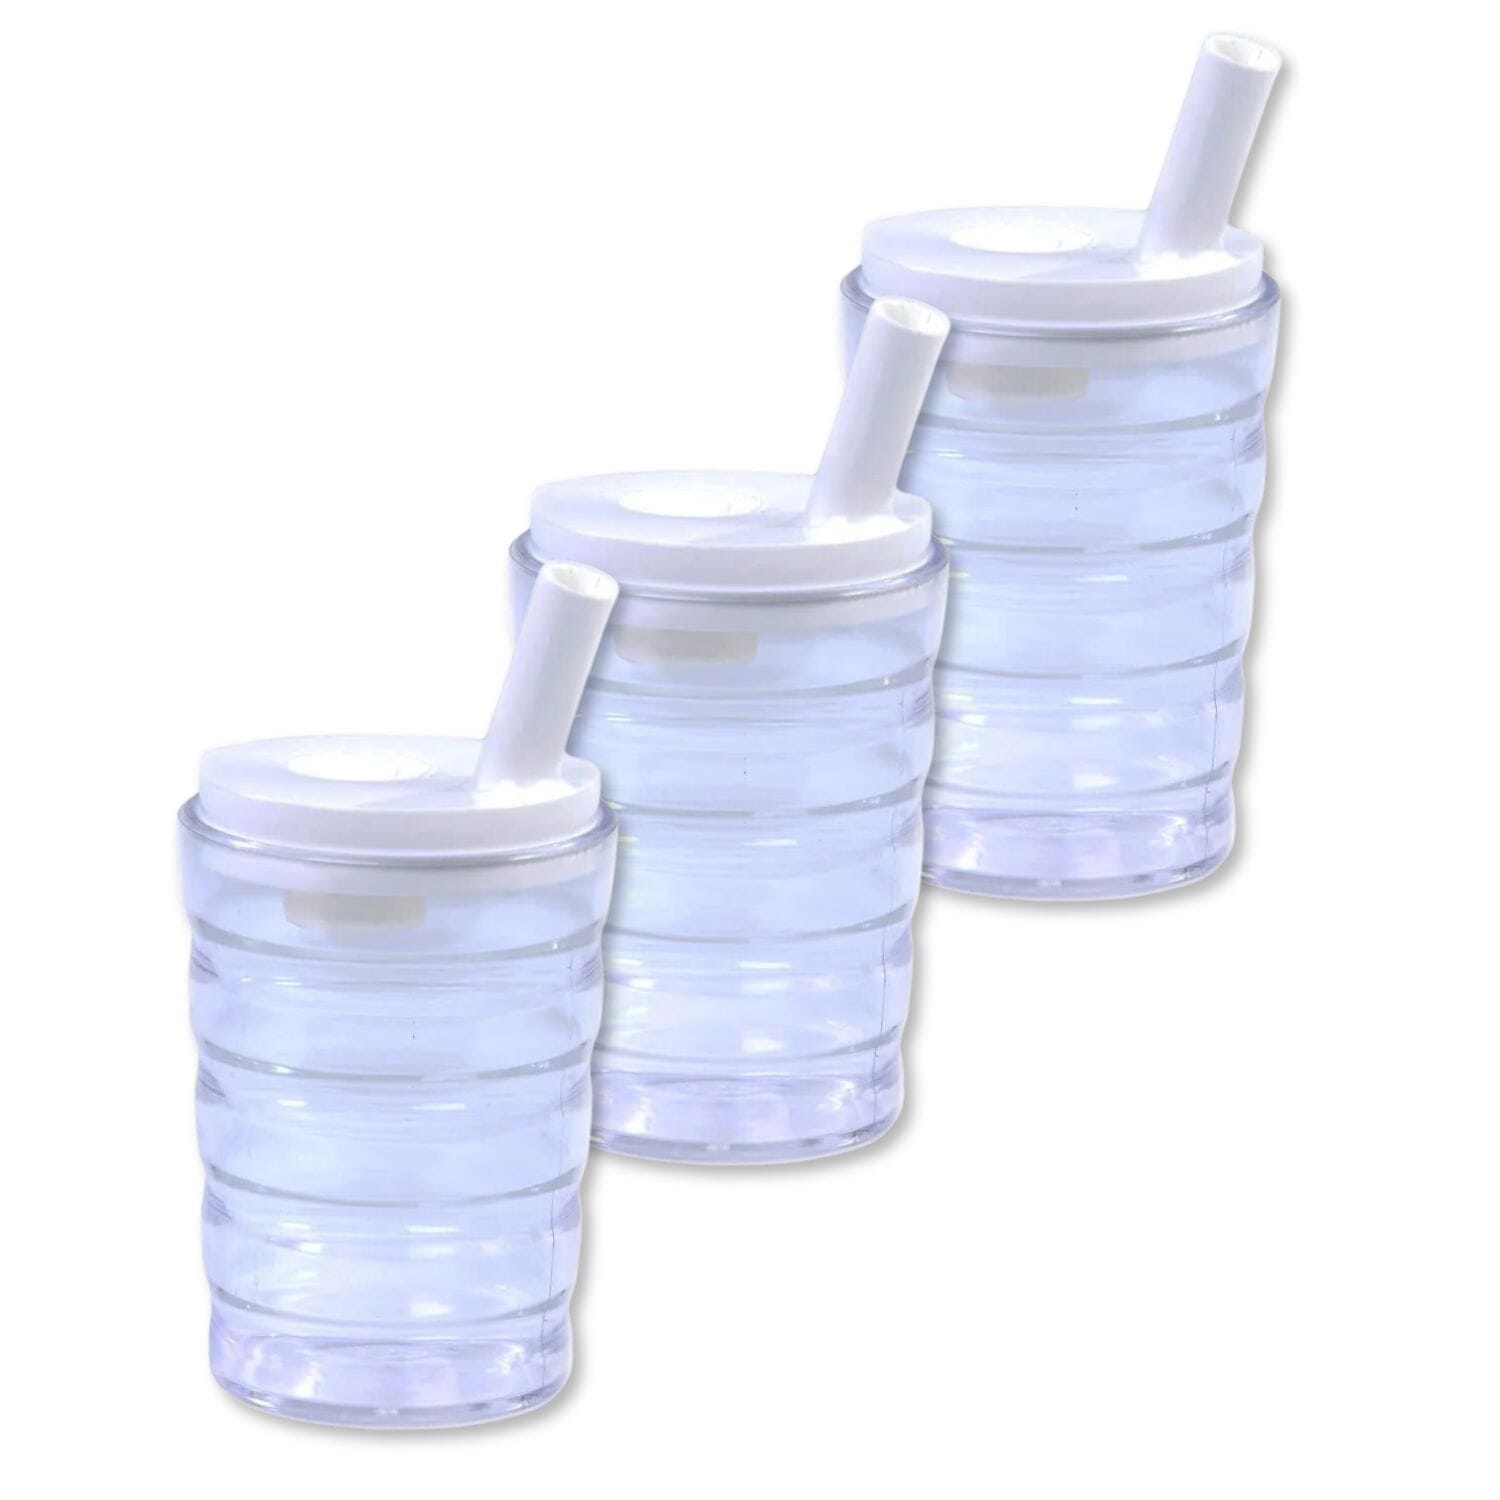 View NonSpill Cup Pack of 3 information